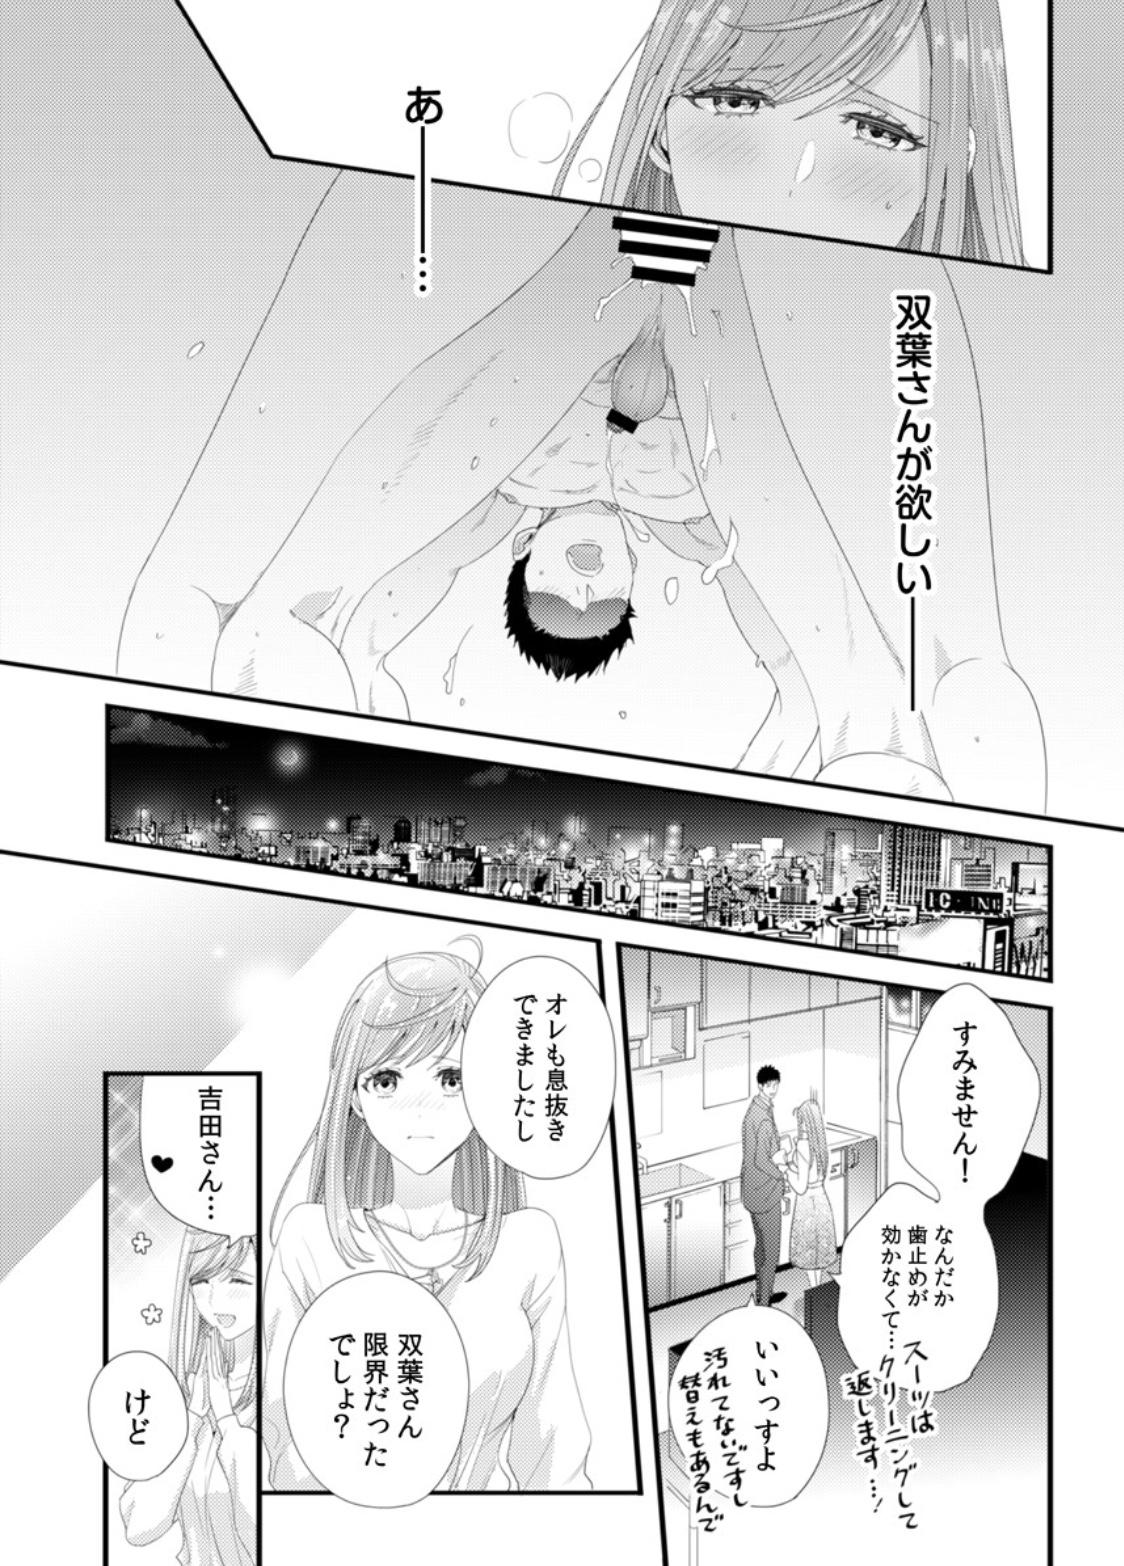 Please Let Me Hold You Futaba-San! Ch. 1-4 76